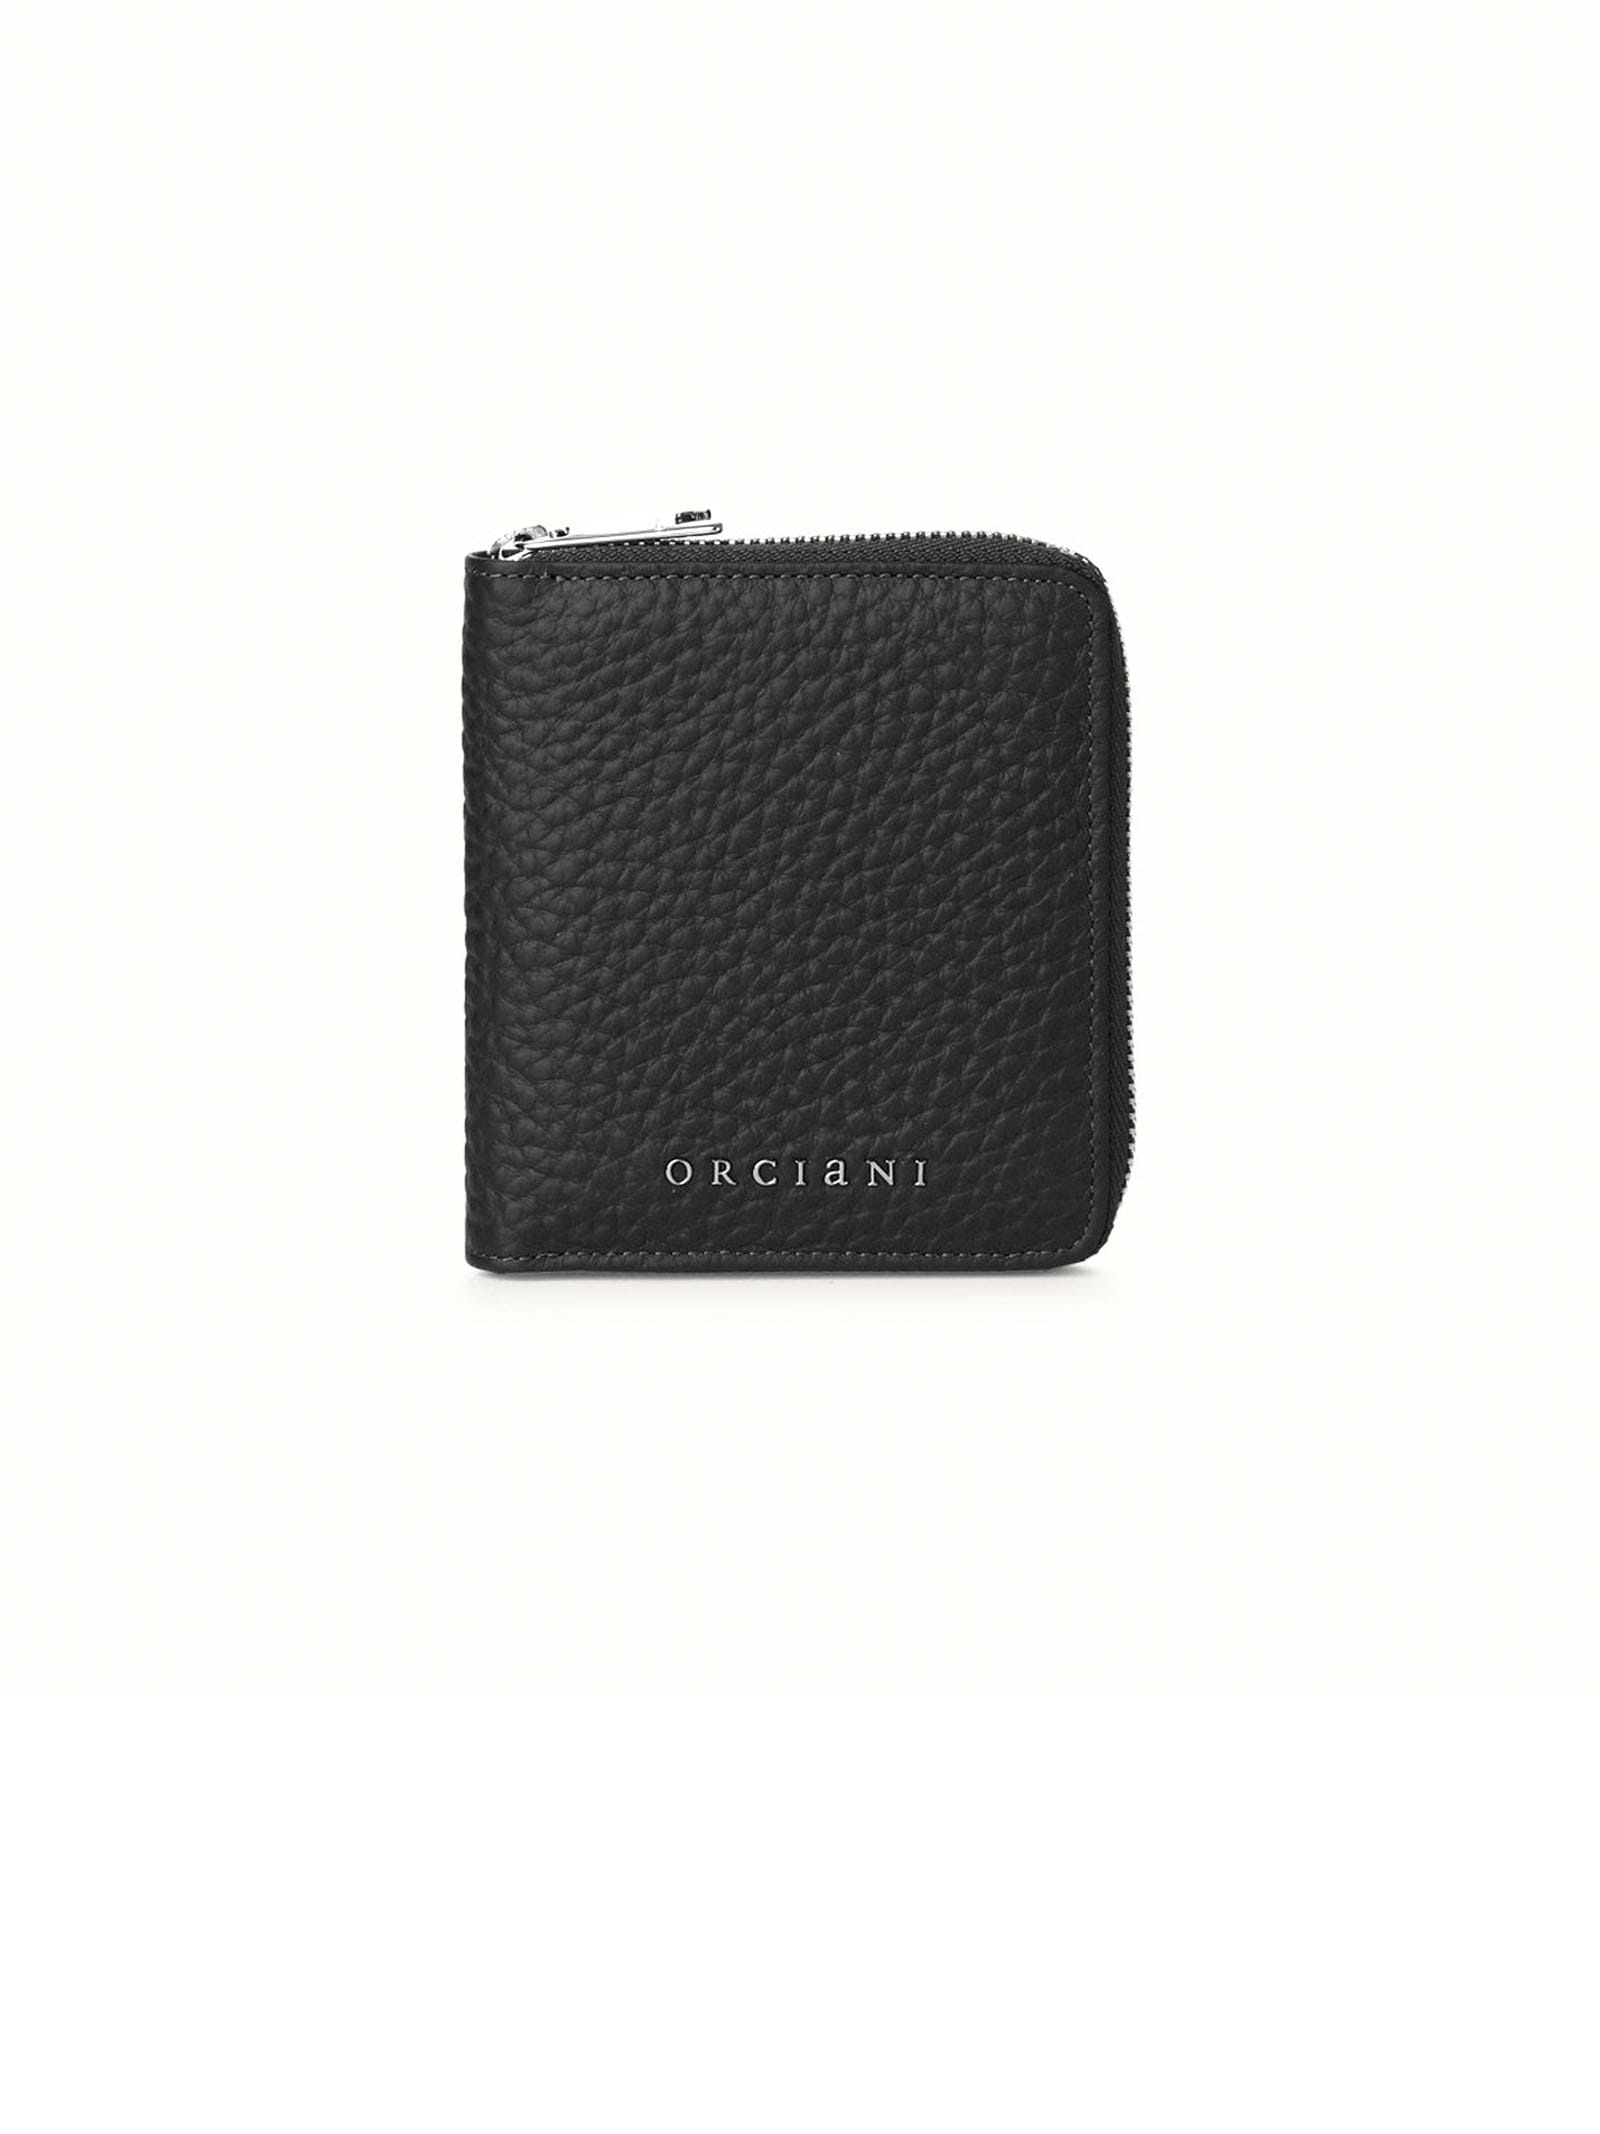 ORCIANI BLACK SOFT LEATHER WALLET